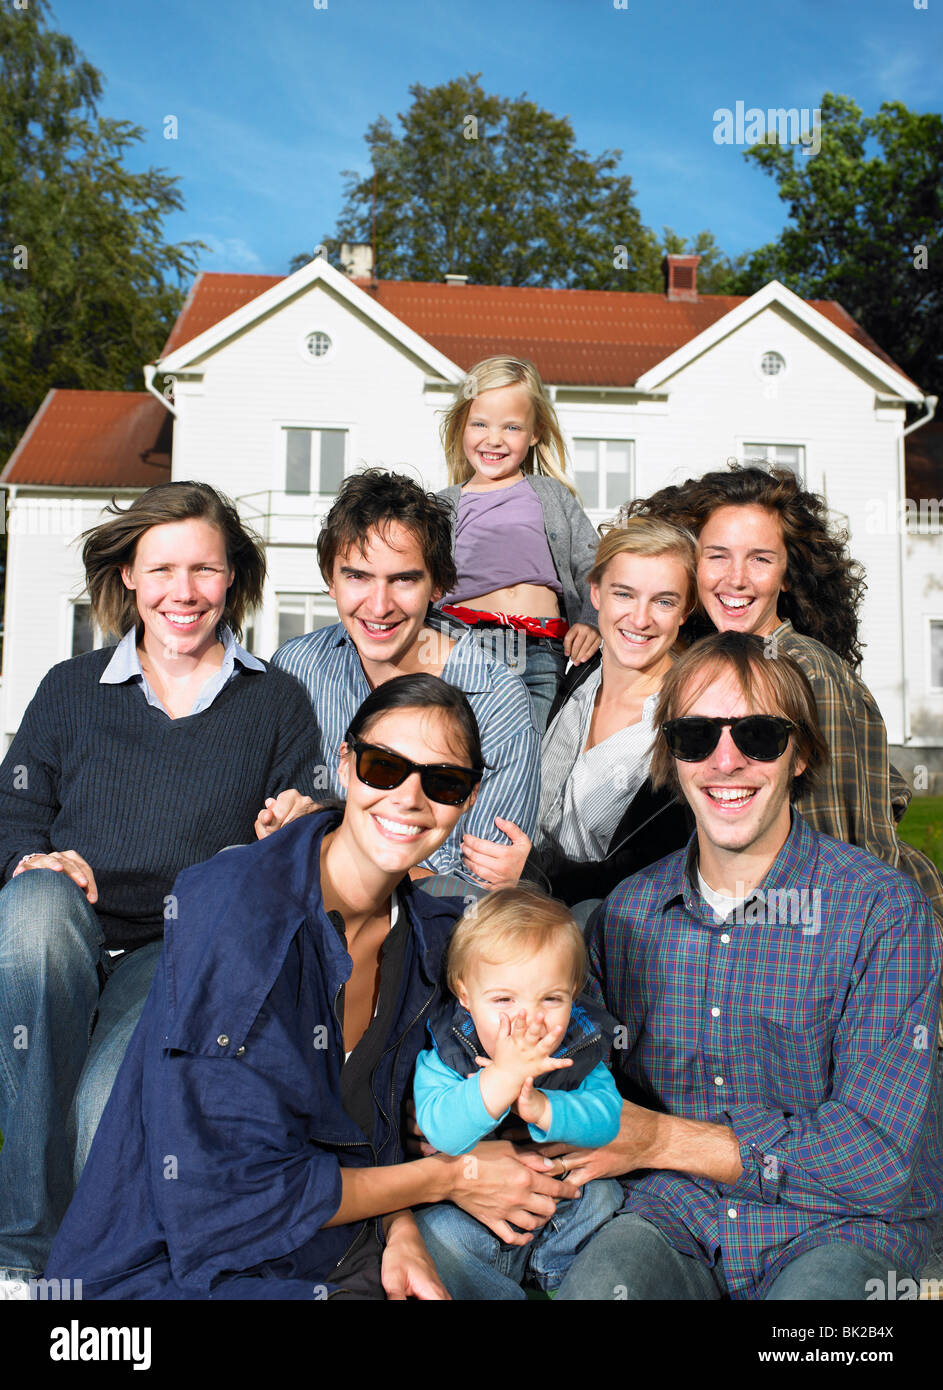 Shoot of a group of people Stock Photo